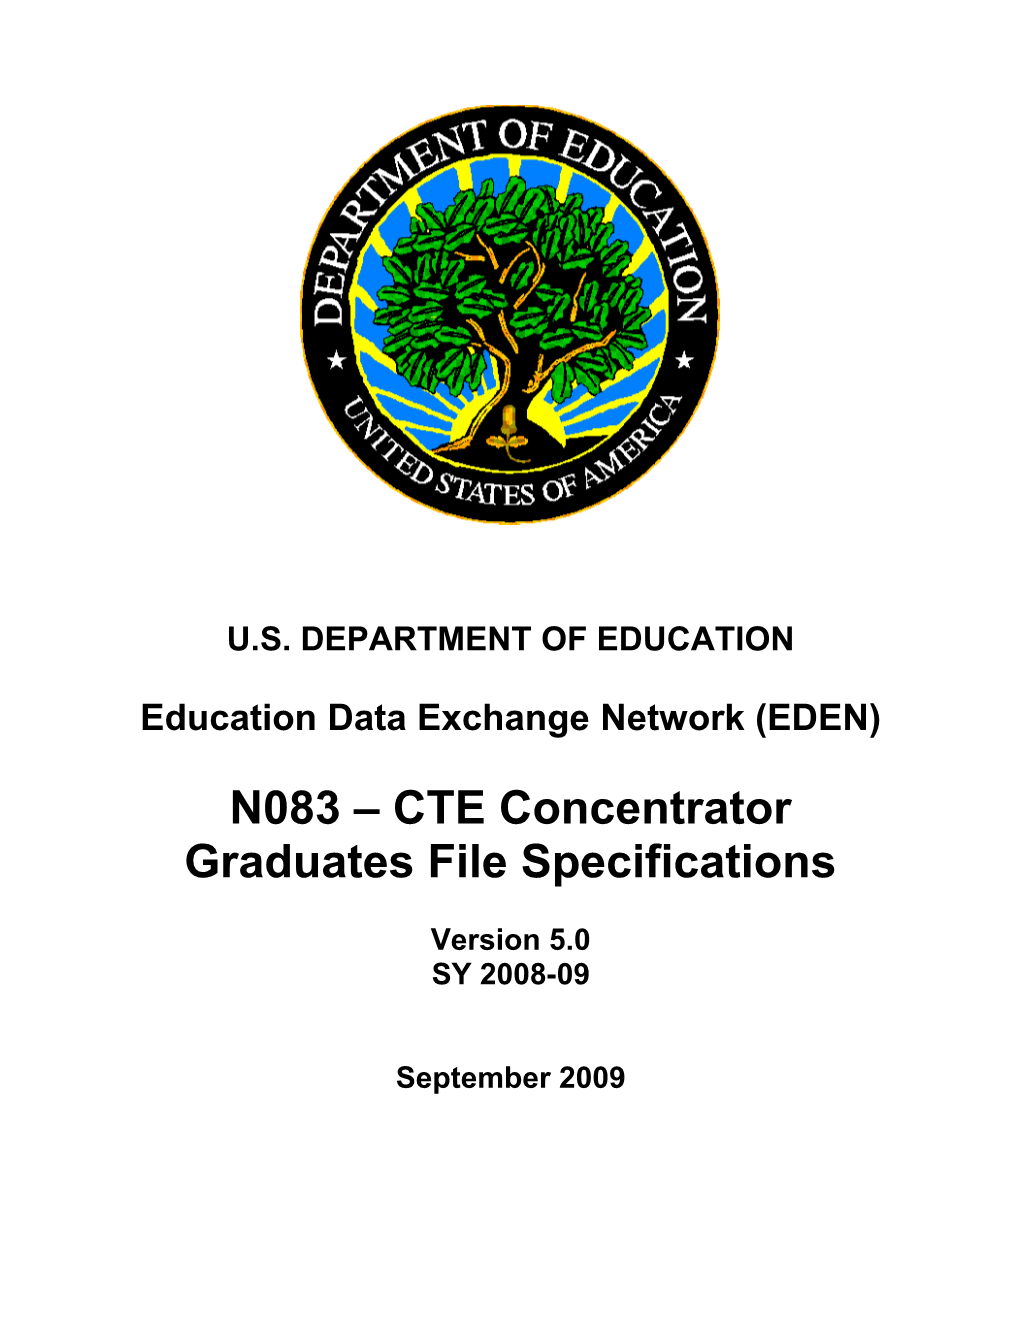 N083 CTE Concentrator Graduates File Specifications (MS Word)